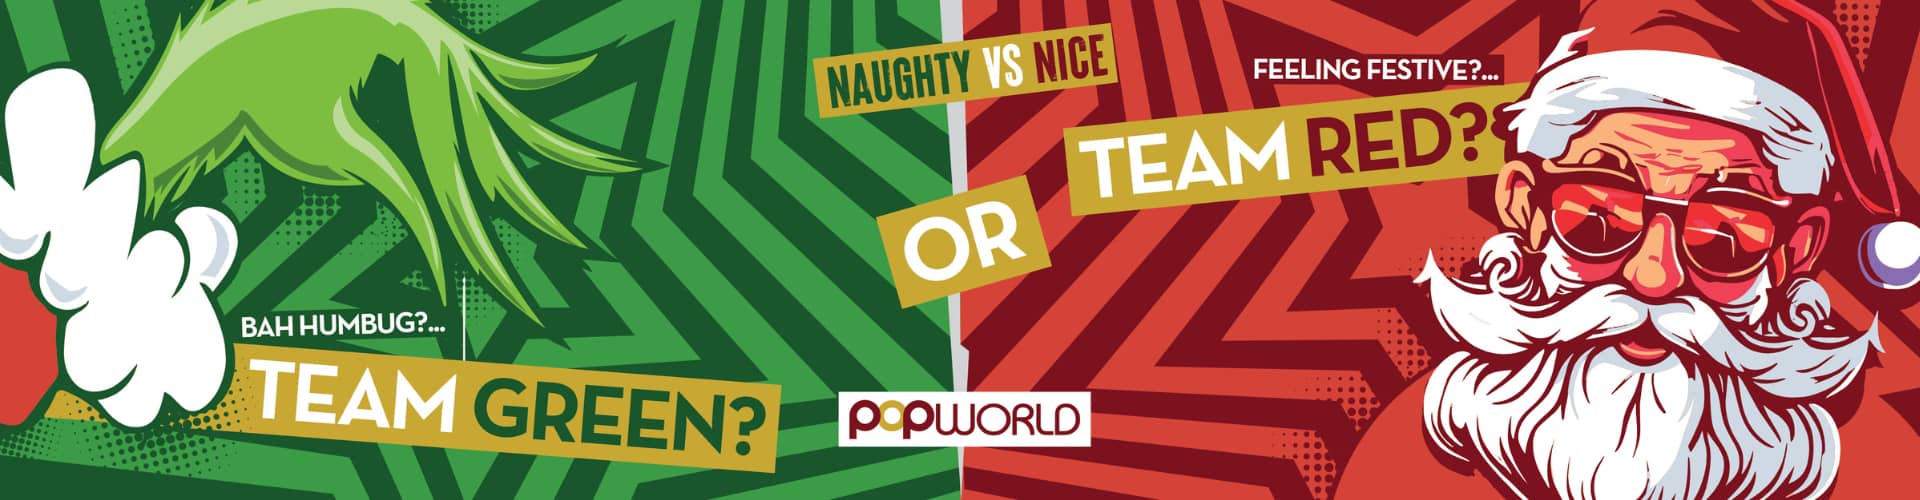 Popworld and Zinc Redditch - Naughty vs Nice - Are you Team Green or Team Red?